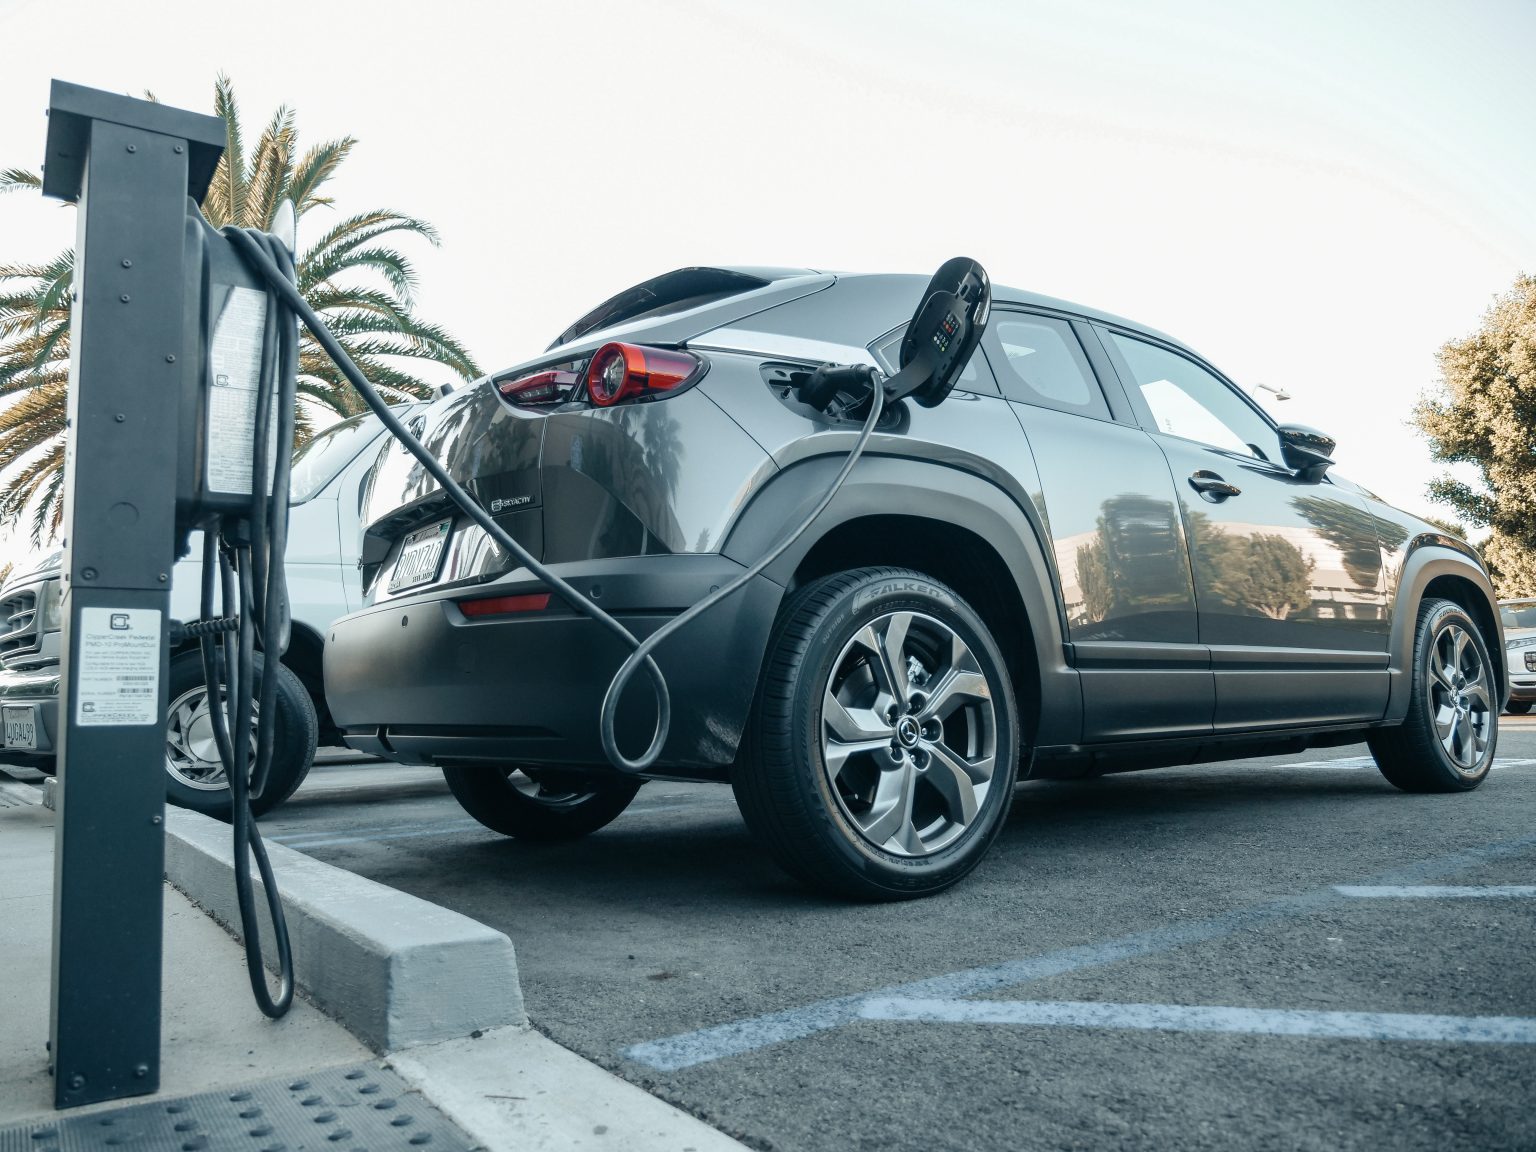 Electric Vehicle charging using commercial EV charger